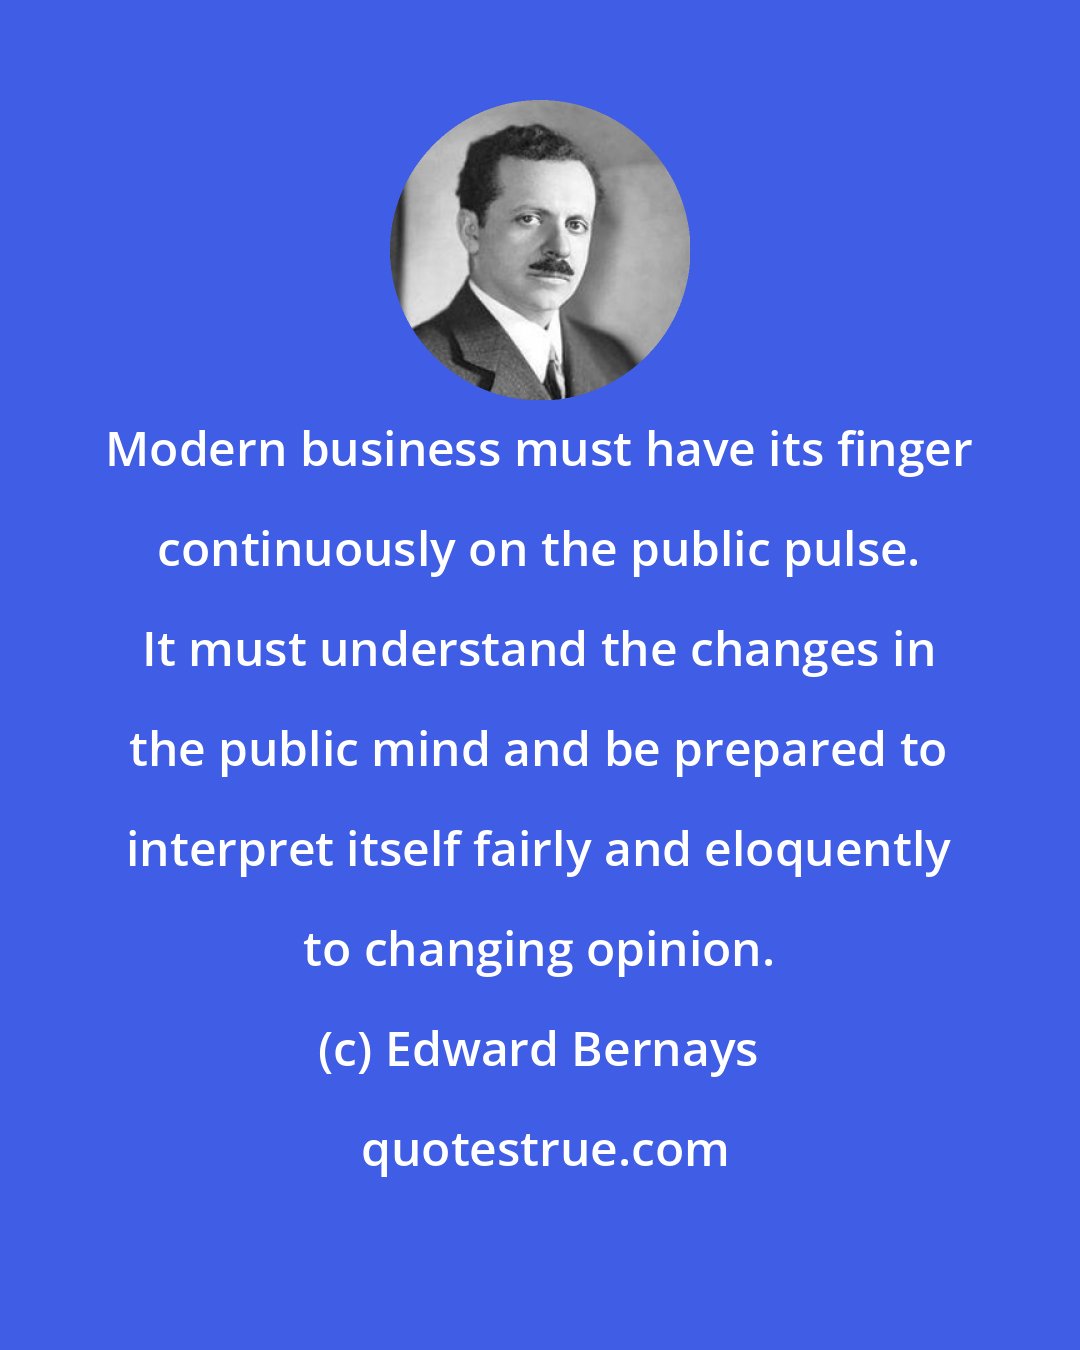 Edward Bernays: Modern business must have its finger continuously on the public pulse. It must understand the changes in the public mind and be prepared to interpret itself fairly and eloquently to changing opinion.